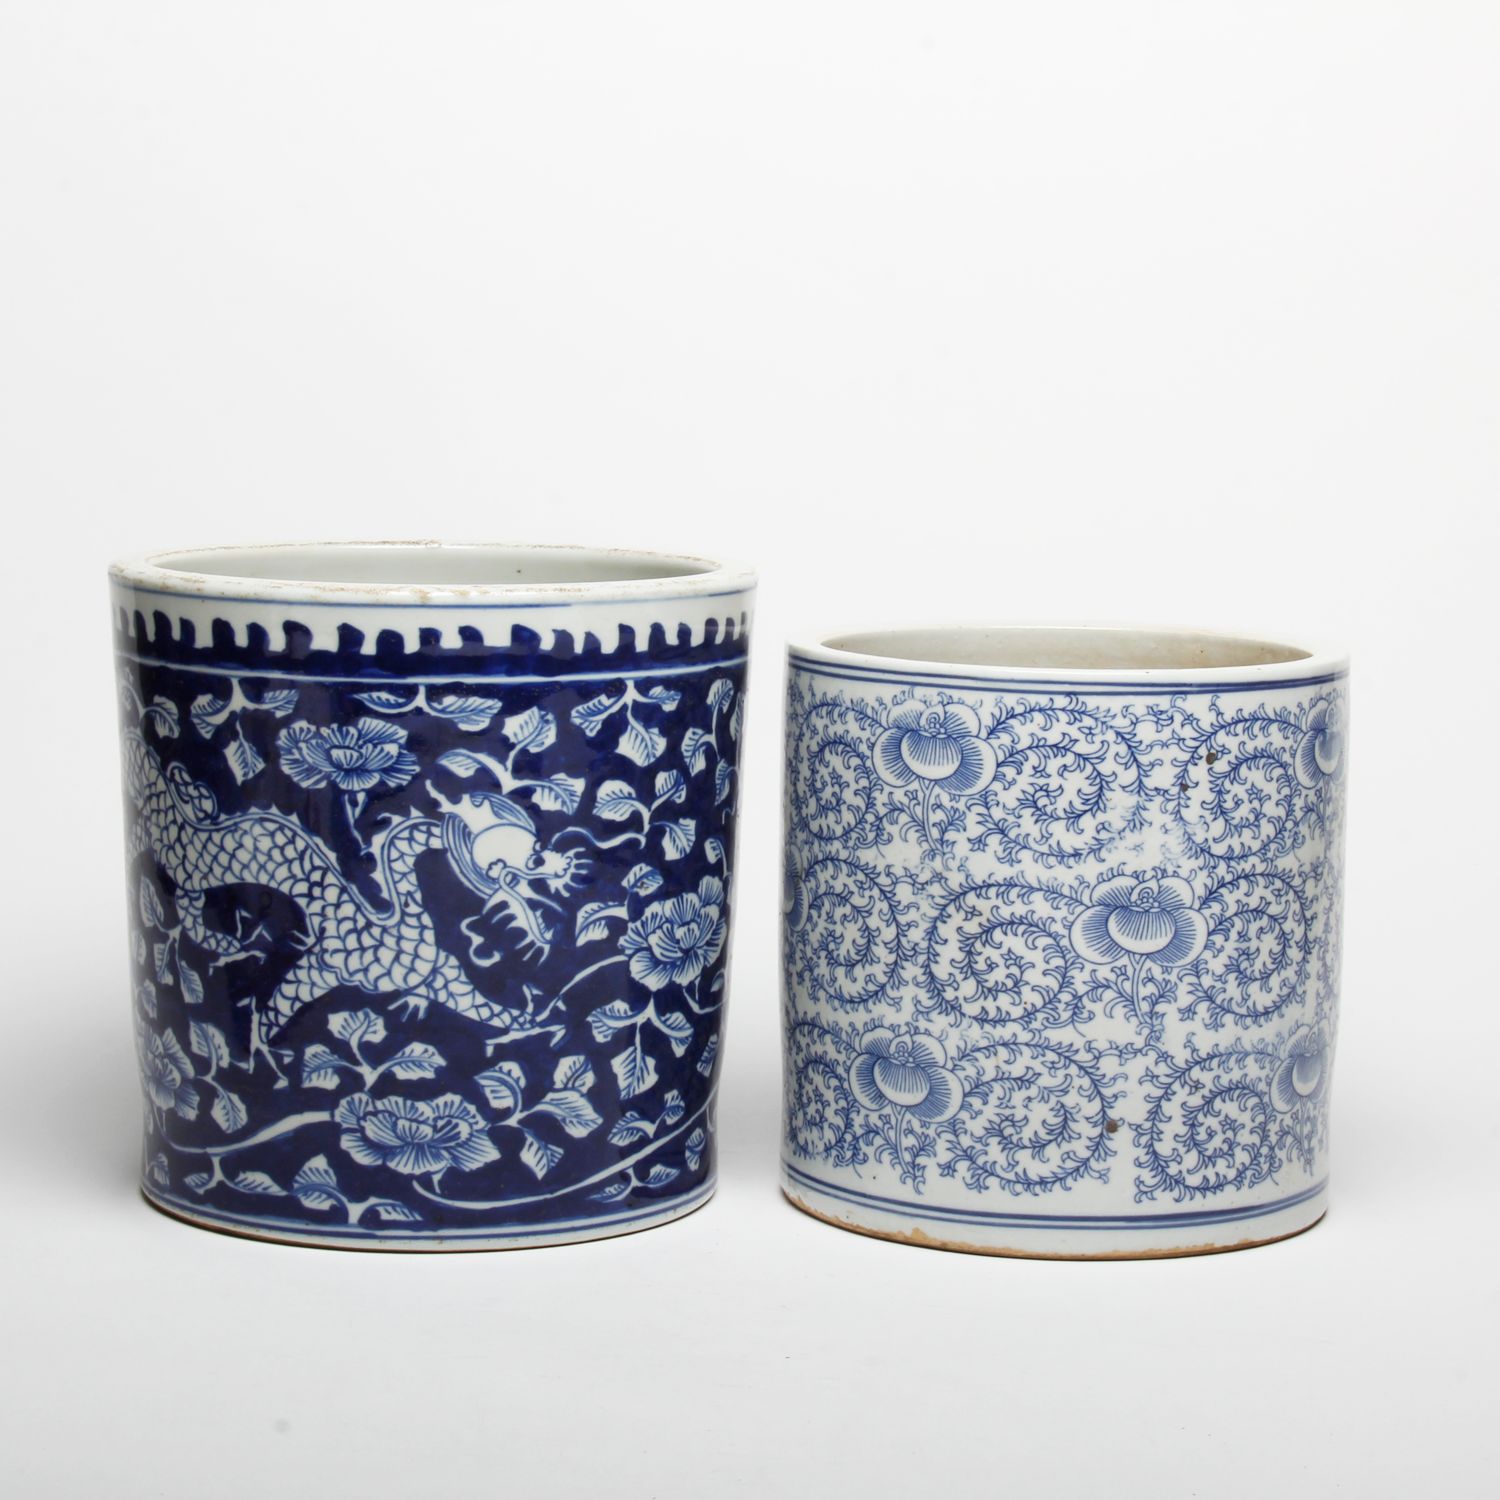 Middle Kingdom: Scrolling Peony Cachepot Product Image 2 of 4